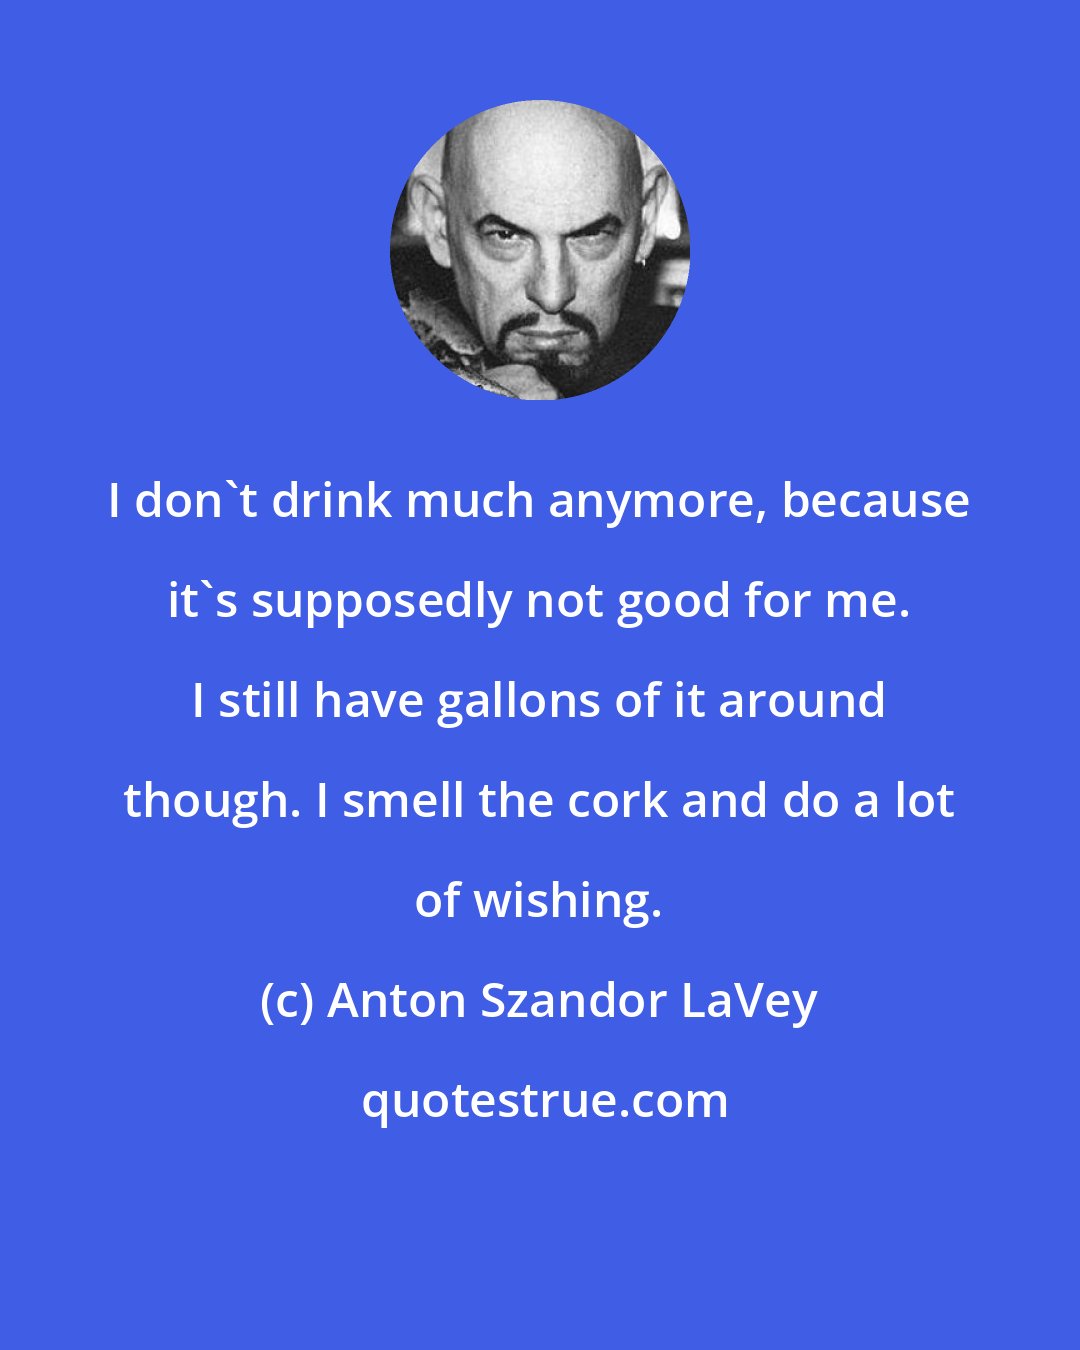 Anton Szandor LaVey: I don't drink much anymore, because it's supposedly not good for me. I still have gallons of it around though. I smell the cork and do a lot of wishing.